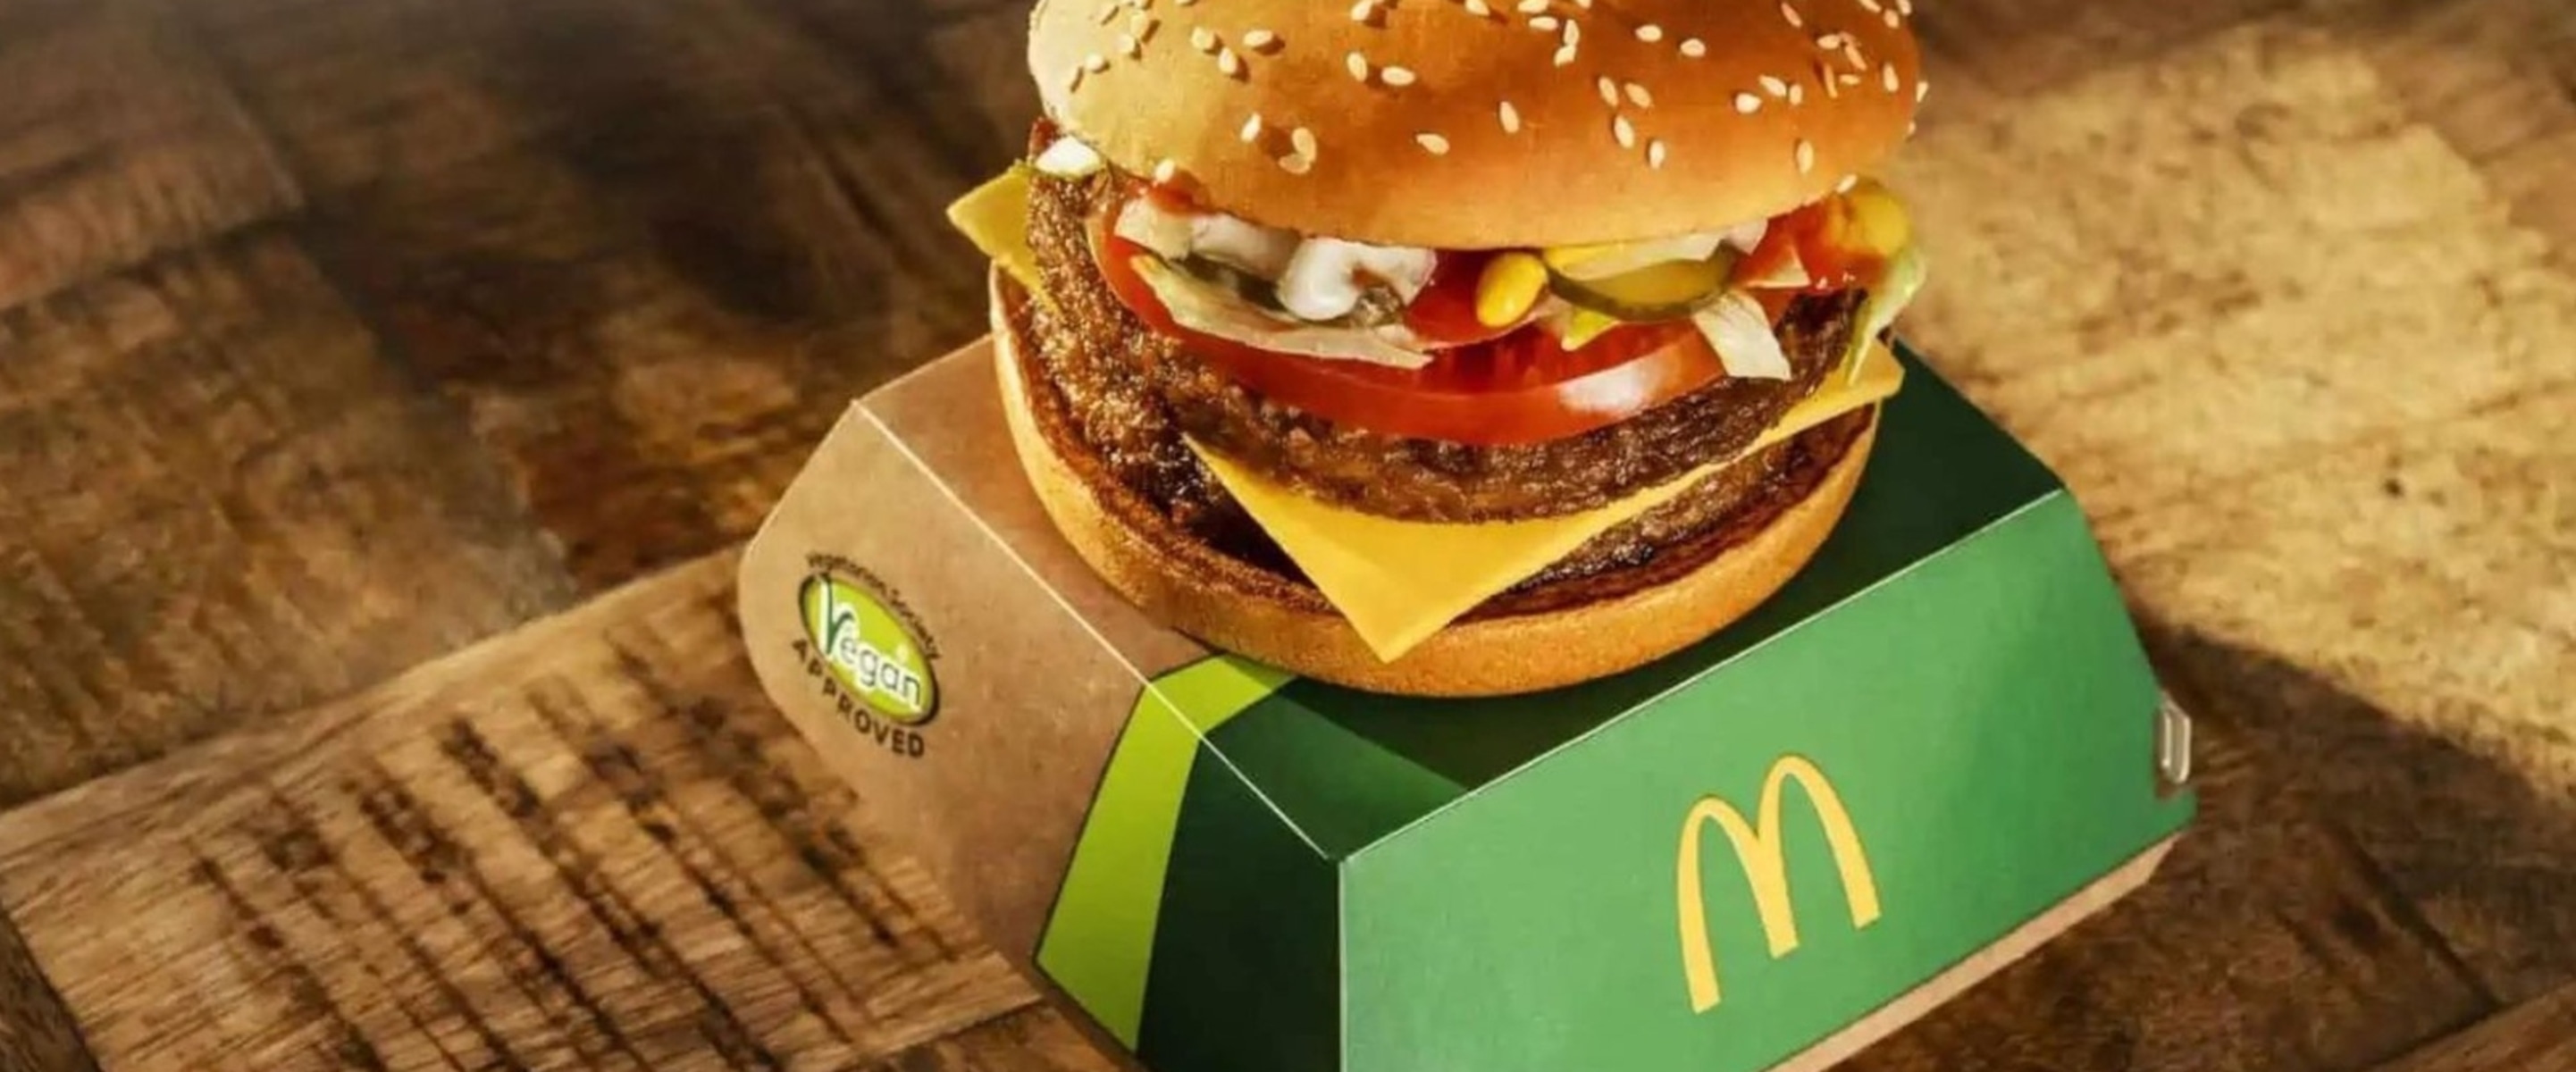 Where Are You, McPlant? Why McDonald’s Still Doesn’t Have a Meatless Option in the US